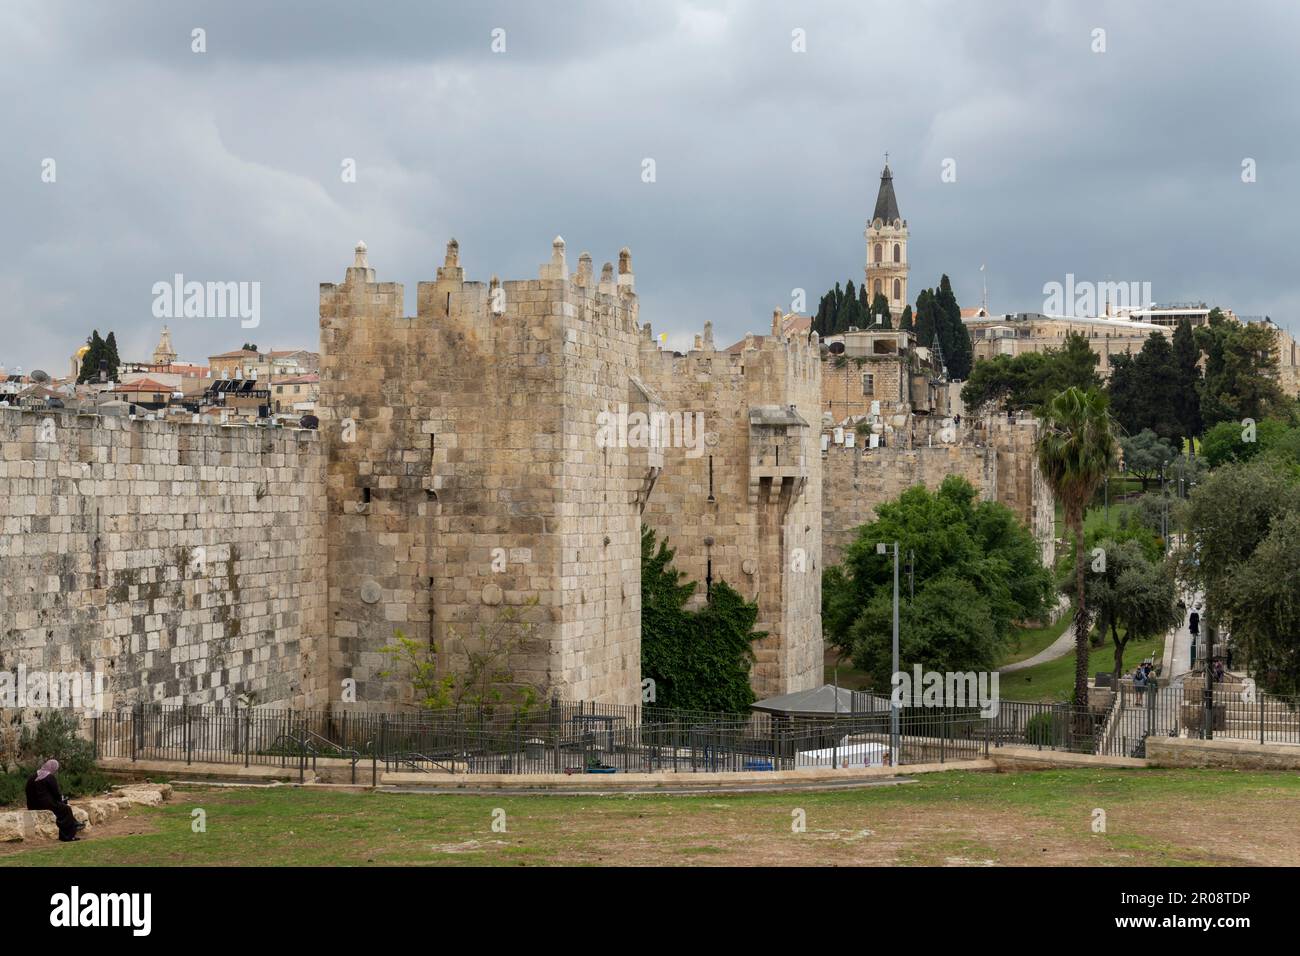 The Ottoman walls of the old city of Jerusalem built in the 16th century by Turkish sultan Suleiman the Magnificent, Israel. Stock Photo